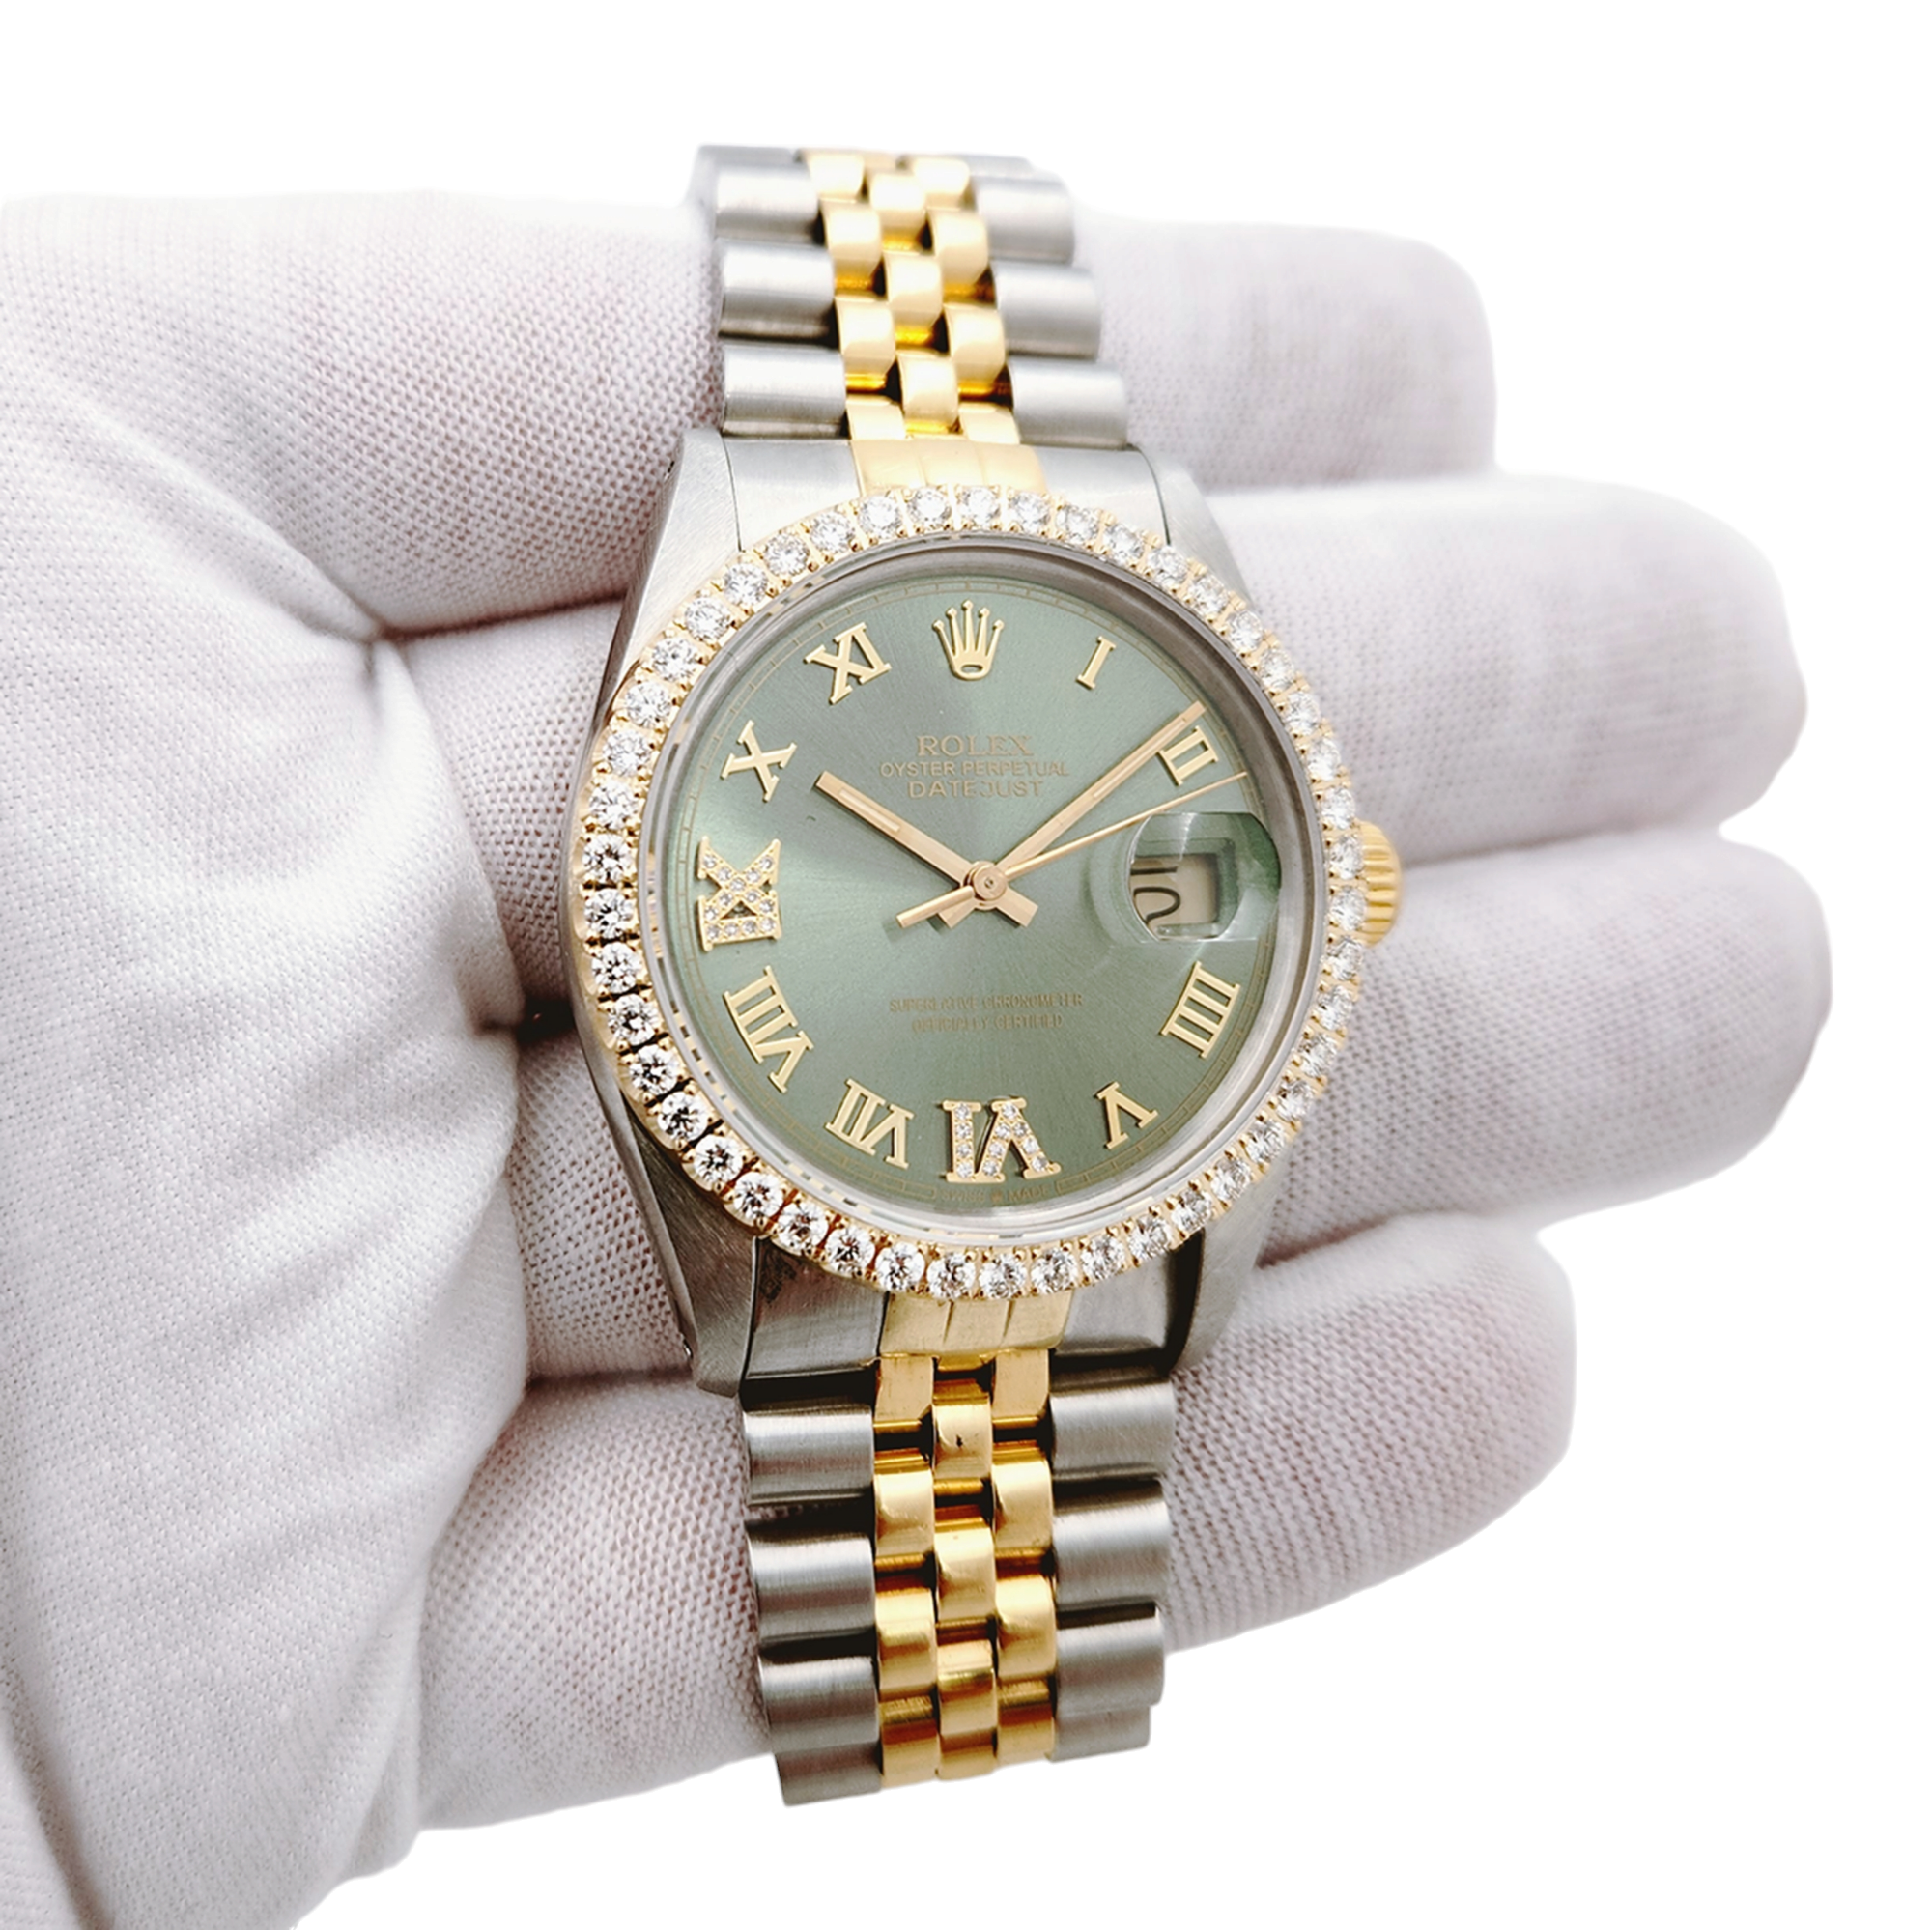 Men's Rolex 36mm DateJust Two Tone 18K Yellow Gold / Stainless Steel Wristwatch w/ Green Dial & Diamond Bezel. (Pre-Owned 16013)